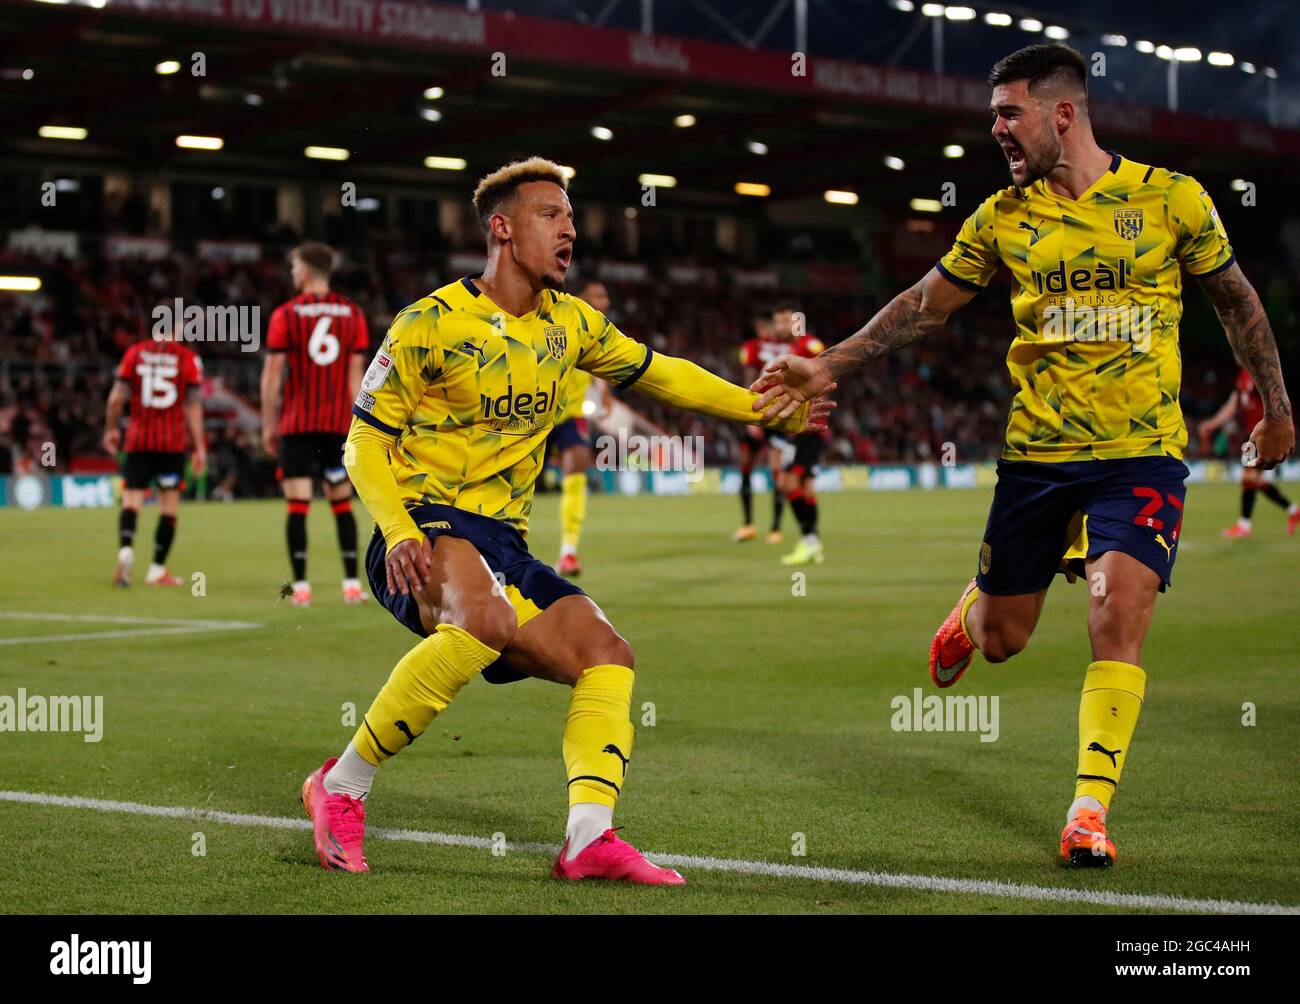 Soccer Football - Championship - AFC Bournemouth v West Bromwich Albion - Vitality Stadium, Bournemouth, Britain - August 6, 2021 West Bromwich Albion's Callum Robinson celebrates scoring their second goal Action Images/Peter Cziborra Stock Photo